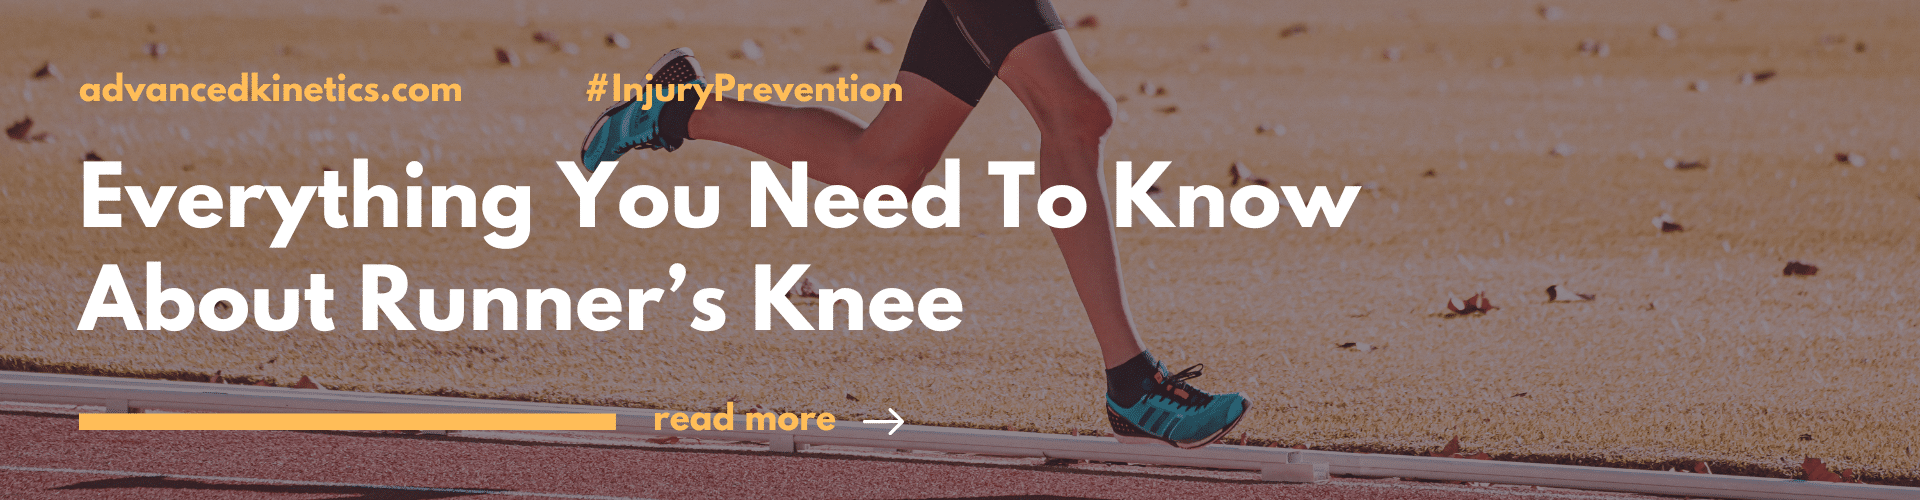 Everything You Need To Know About Runner’s Knee